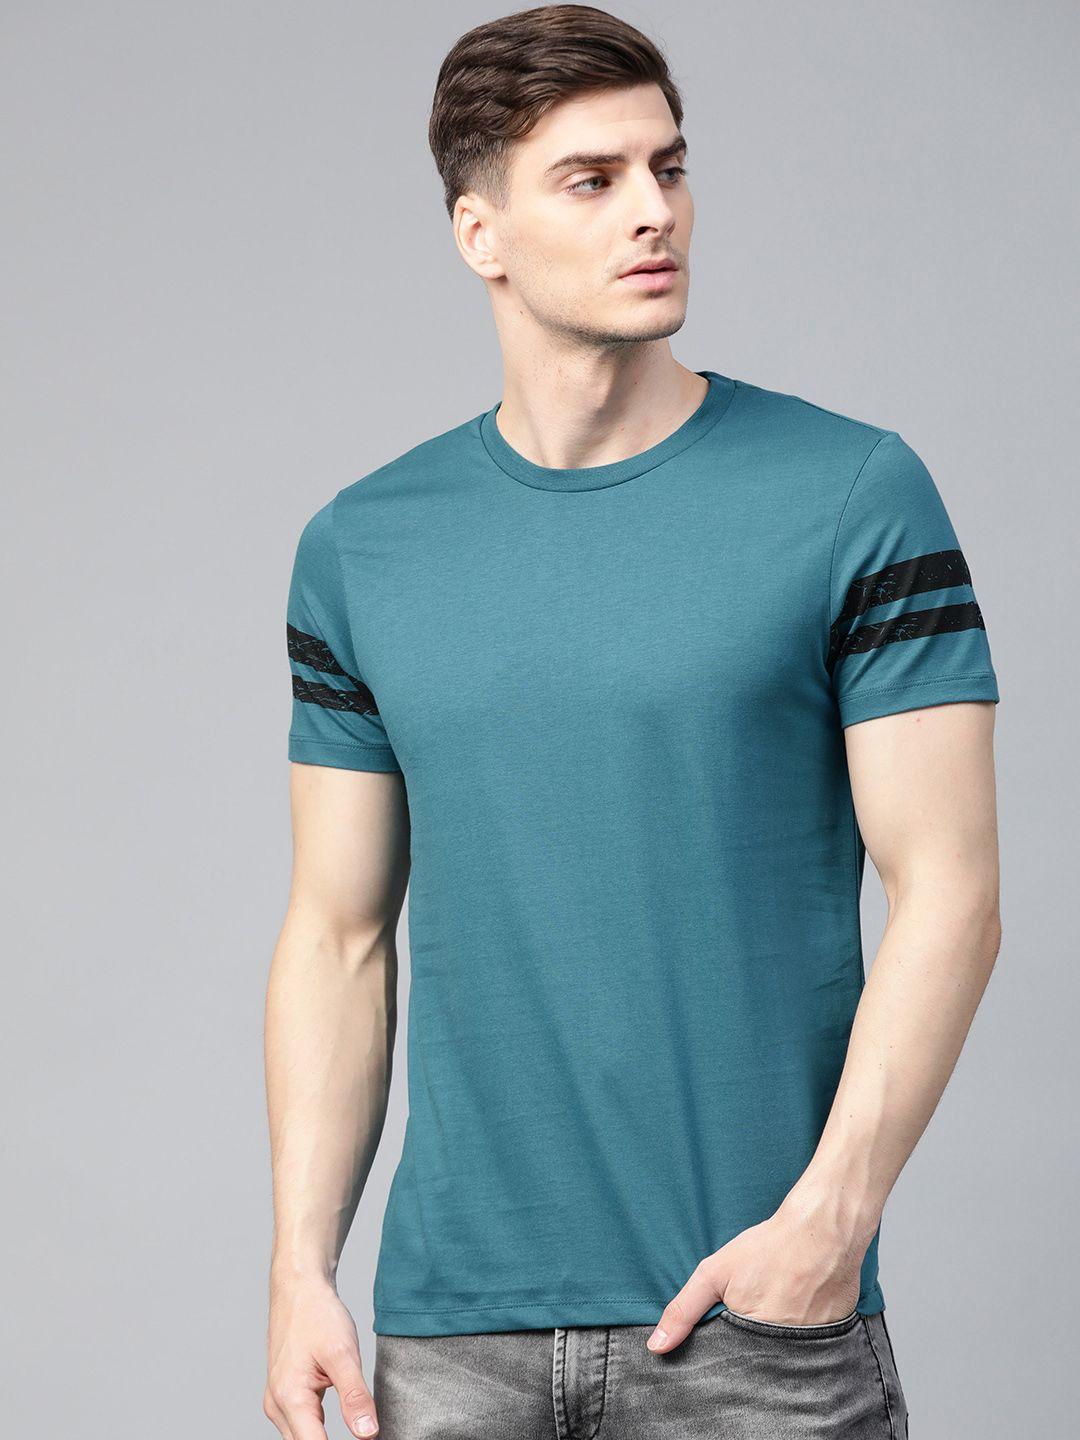 roadster men teal blue solid round neck pure cotton t-shirt